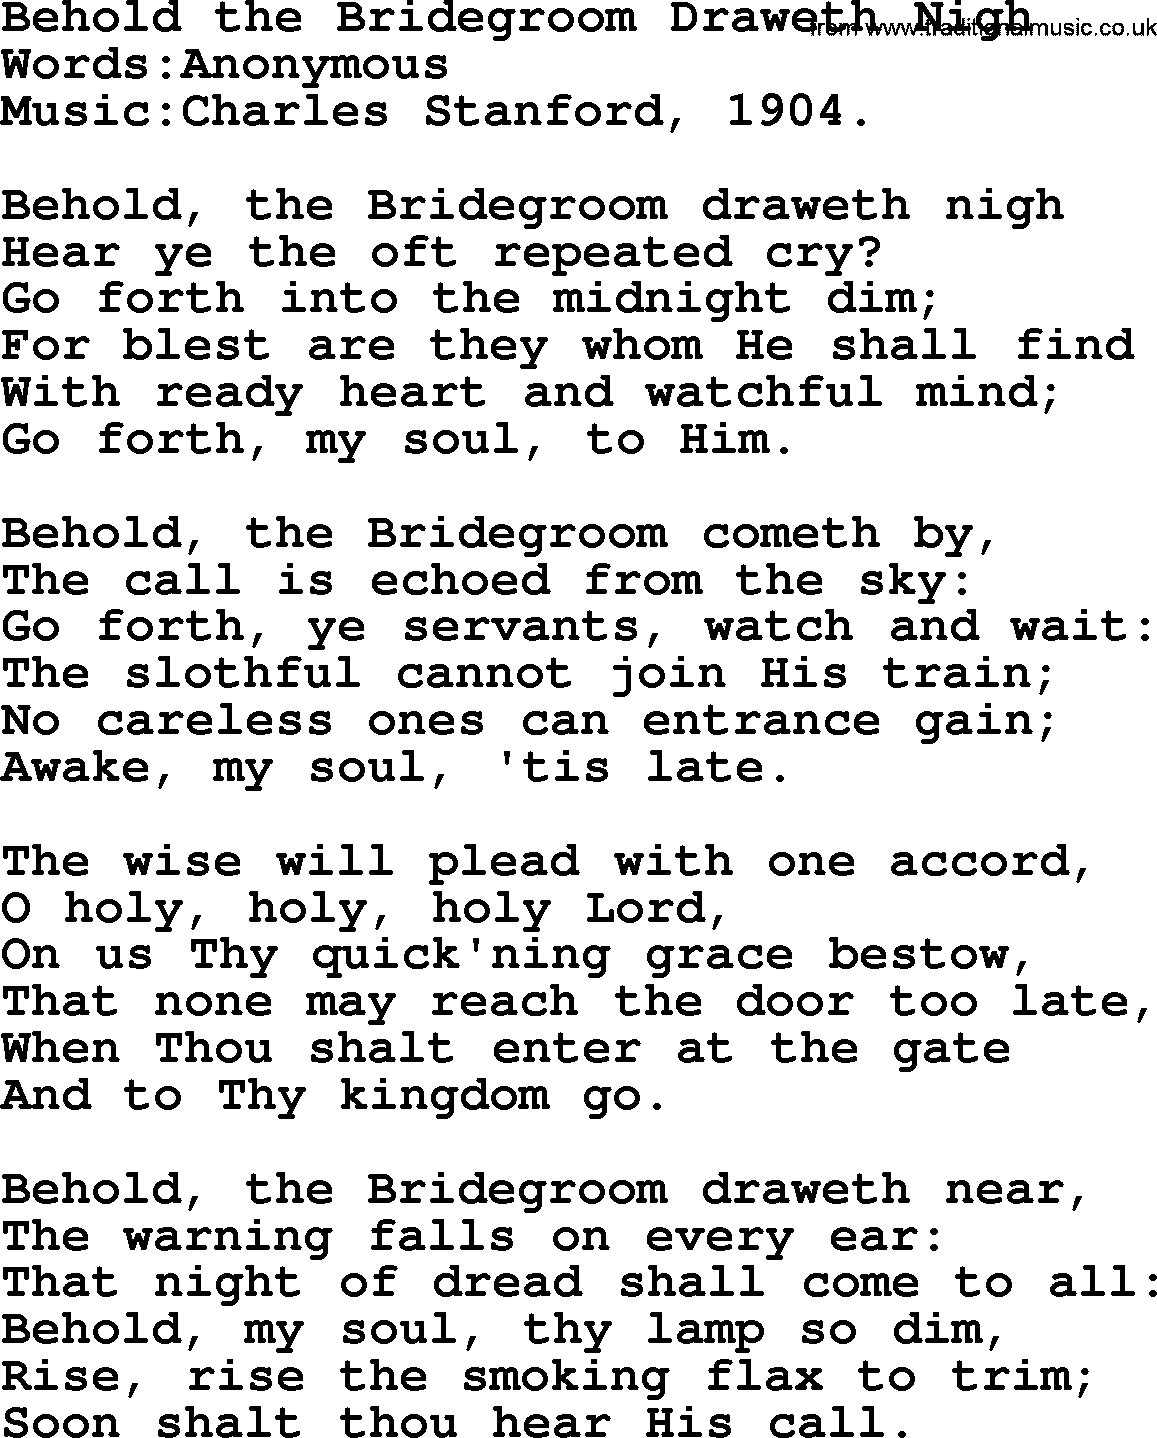 Christian hymns and songs about Jesus' Return(The Second Coming): Behold The Bridegroom Draweth Nigh, lyrics with PDF